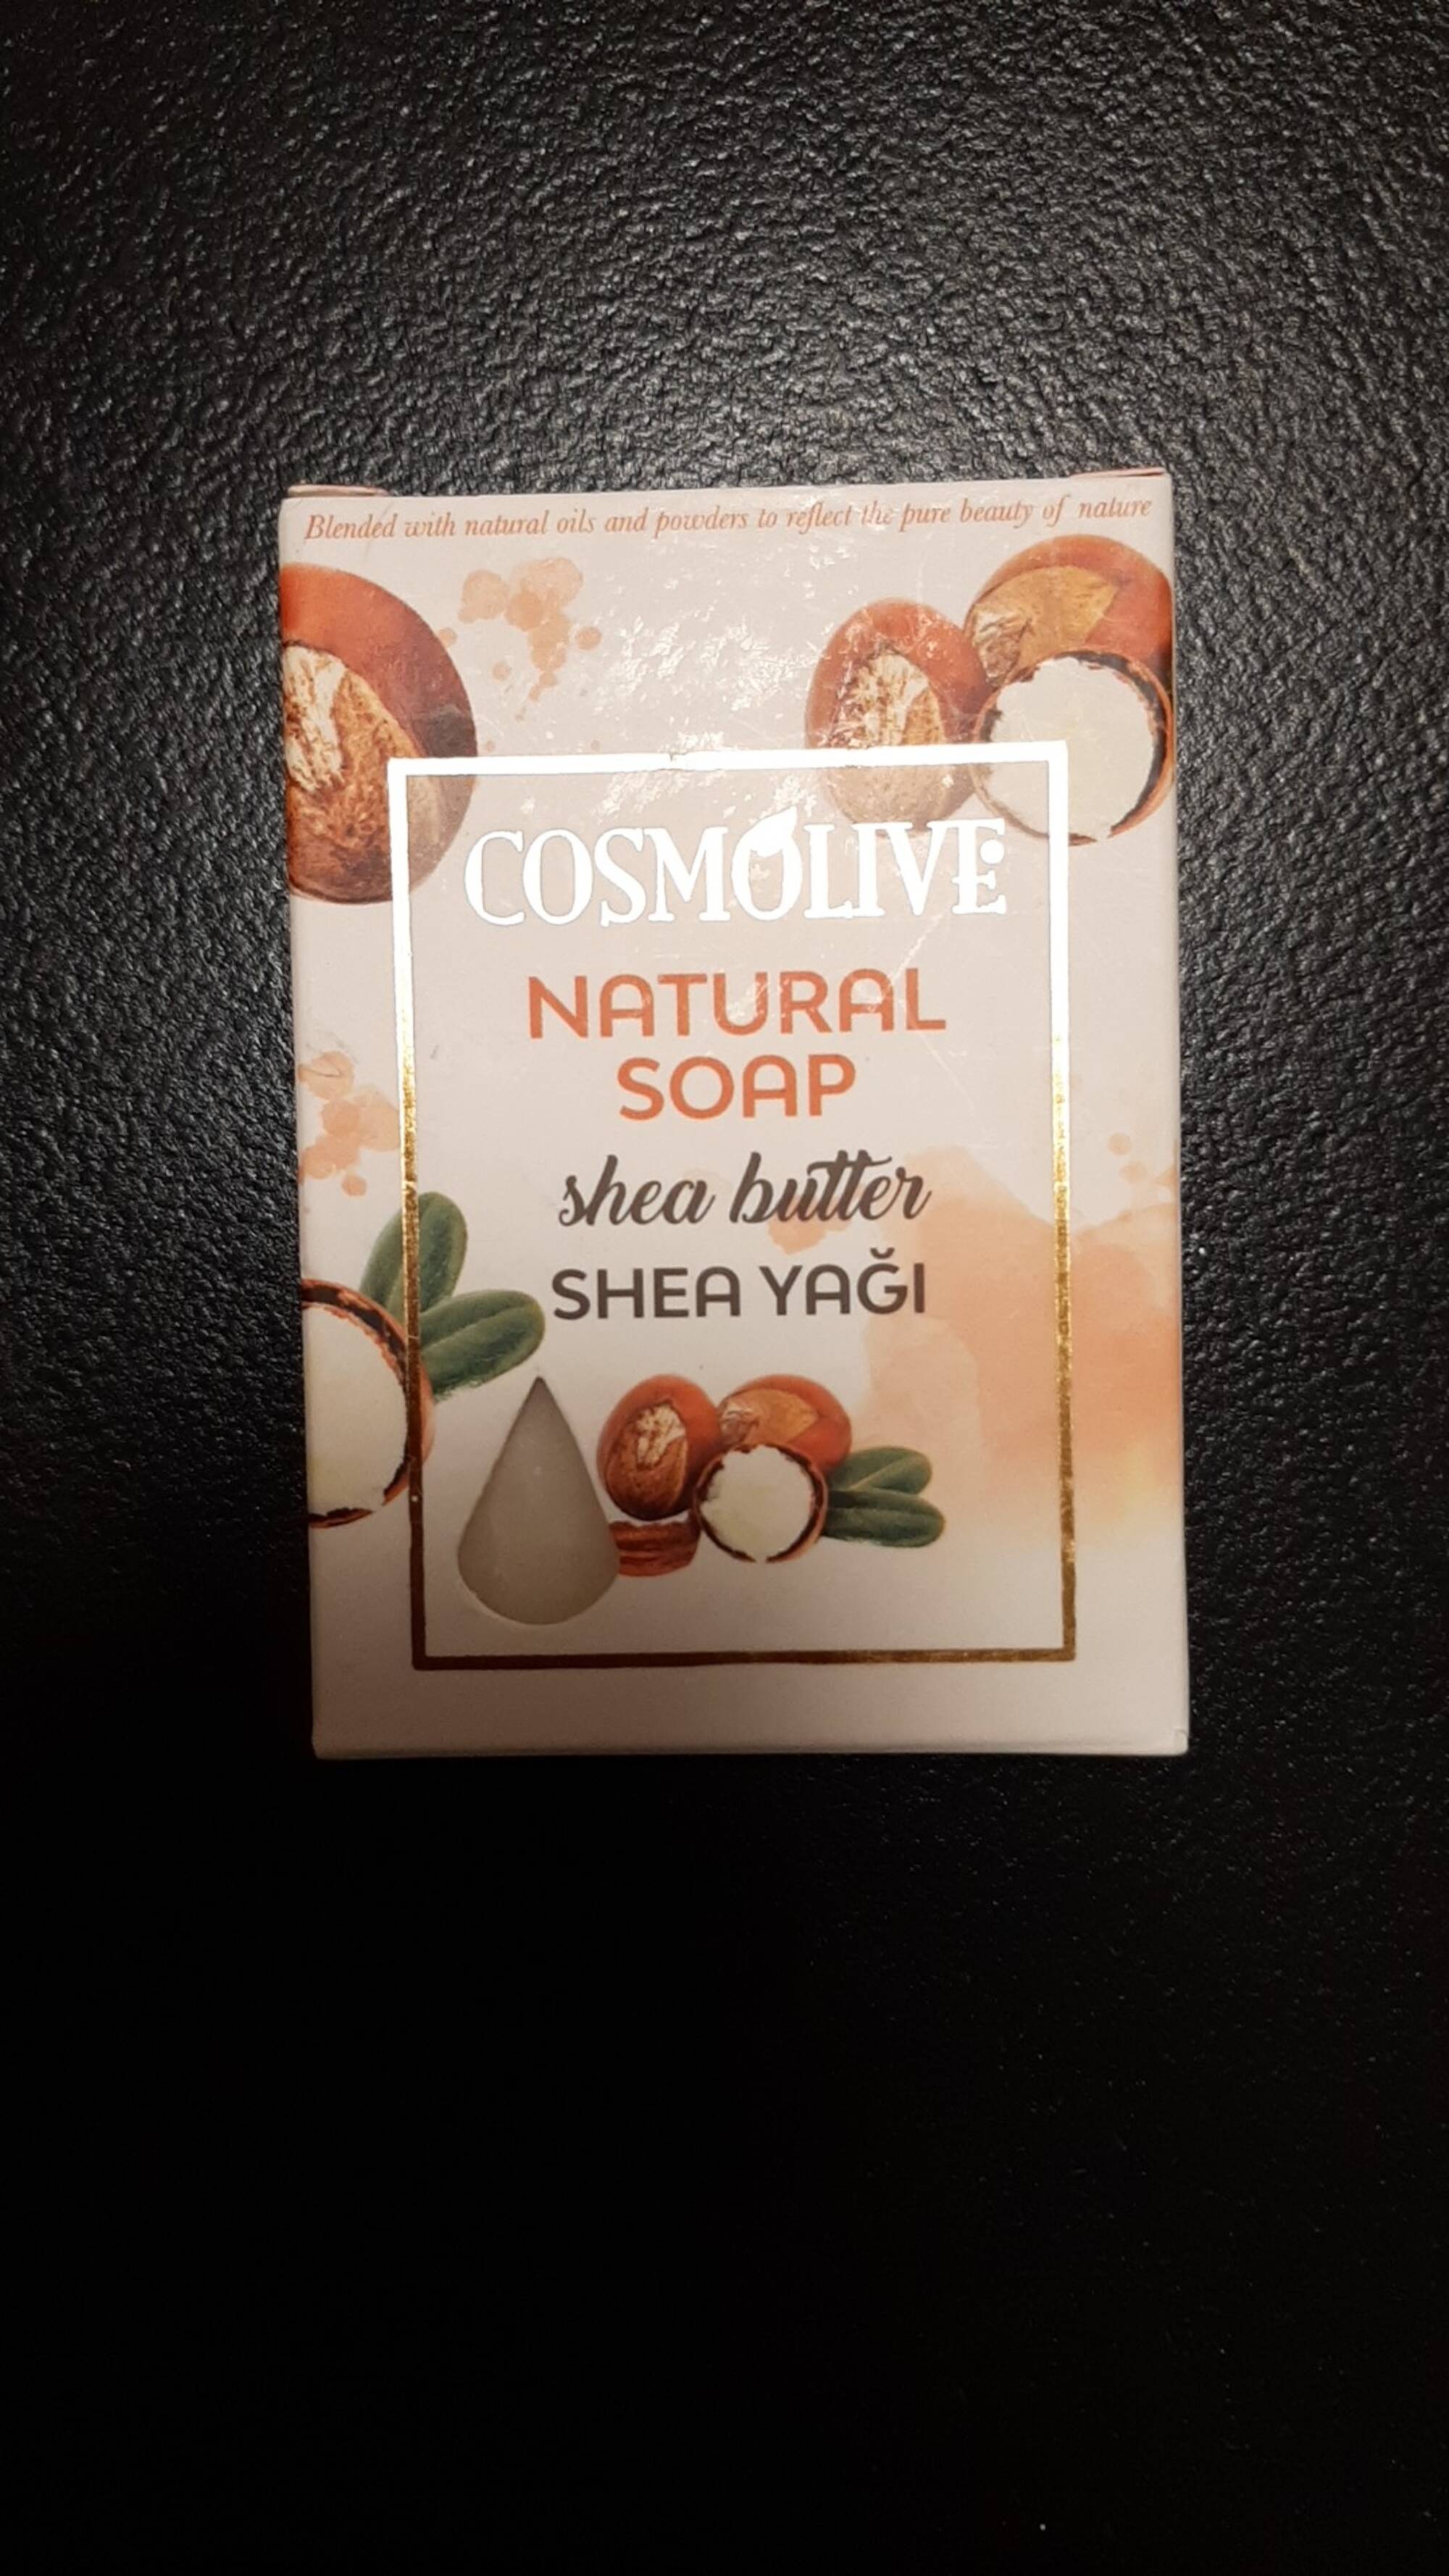 COSMOLIVE - Natural soap shea butter 